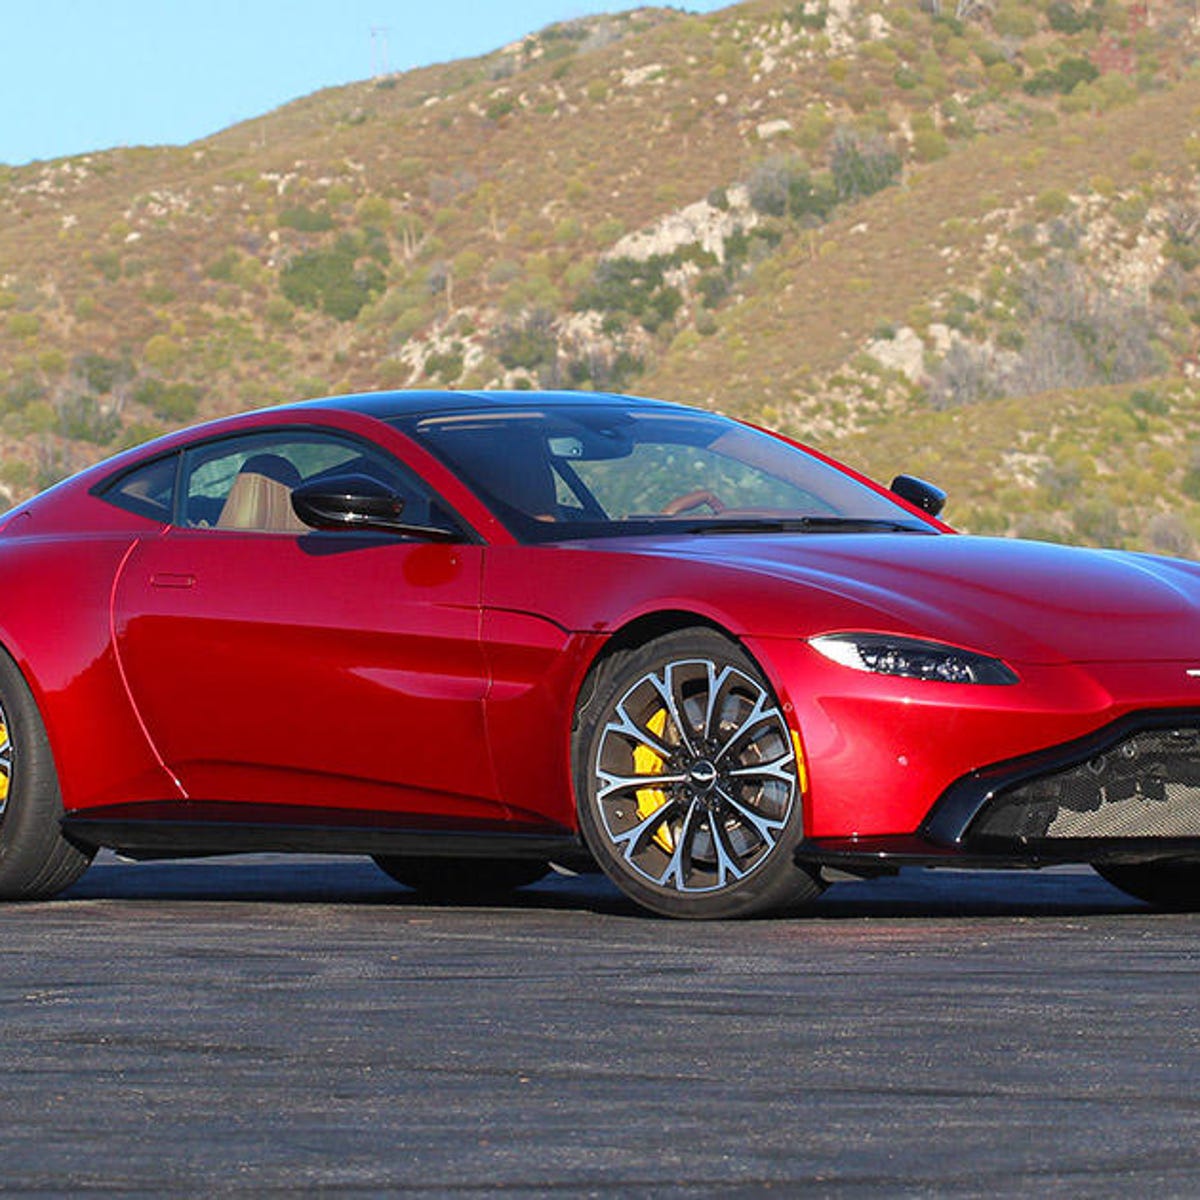 gentage Forbyde dok 2019 Aston Martin Vantage review: Beauty is a beast - CNET